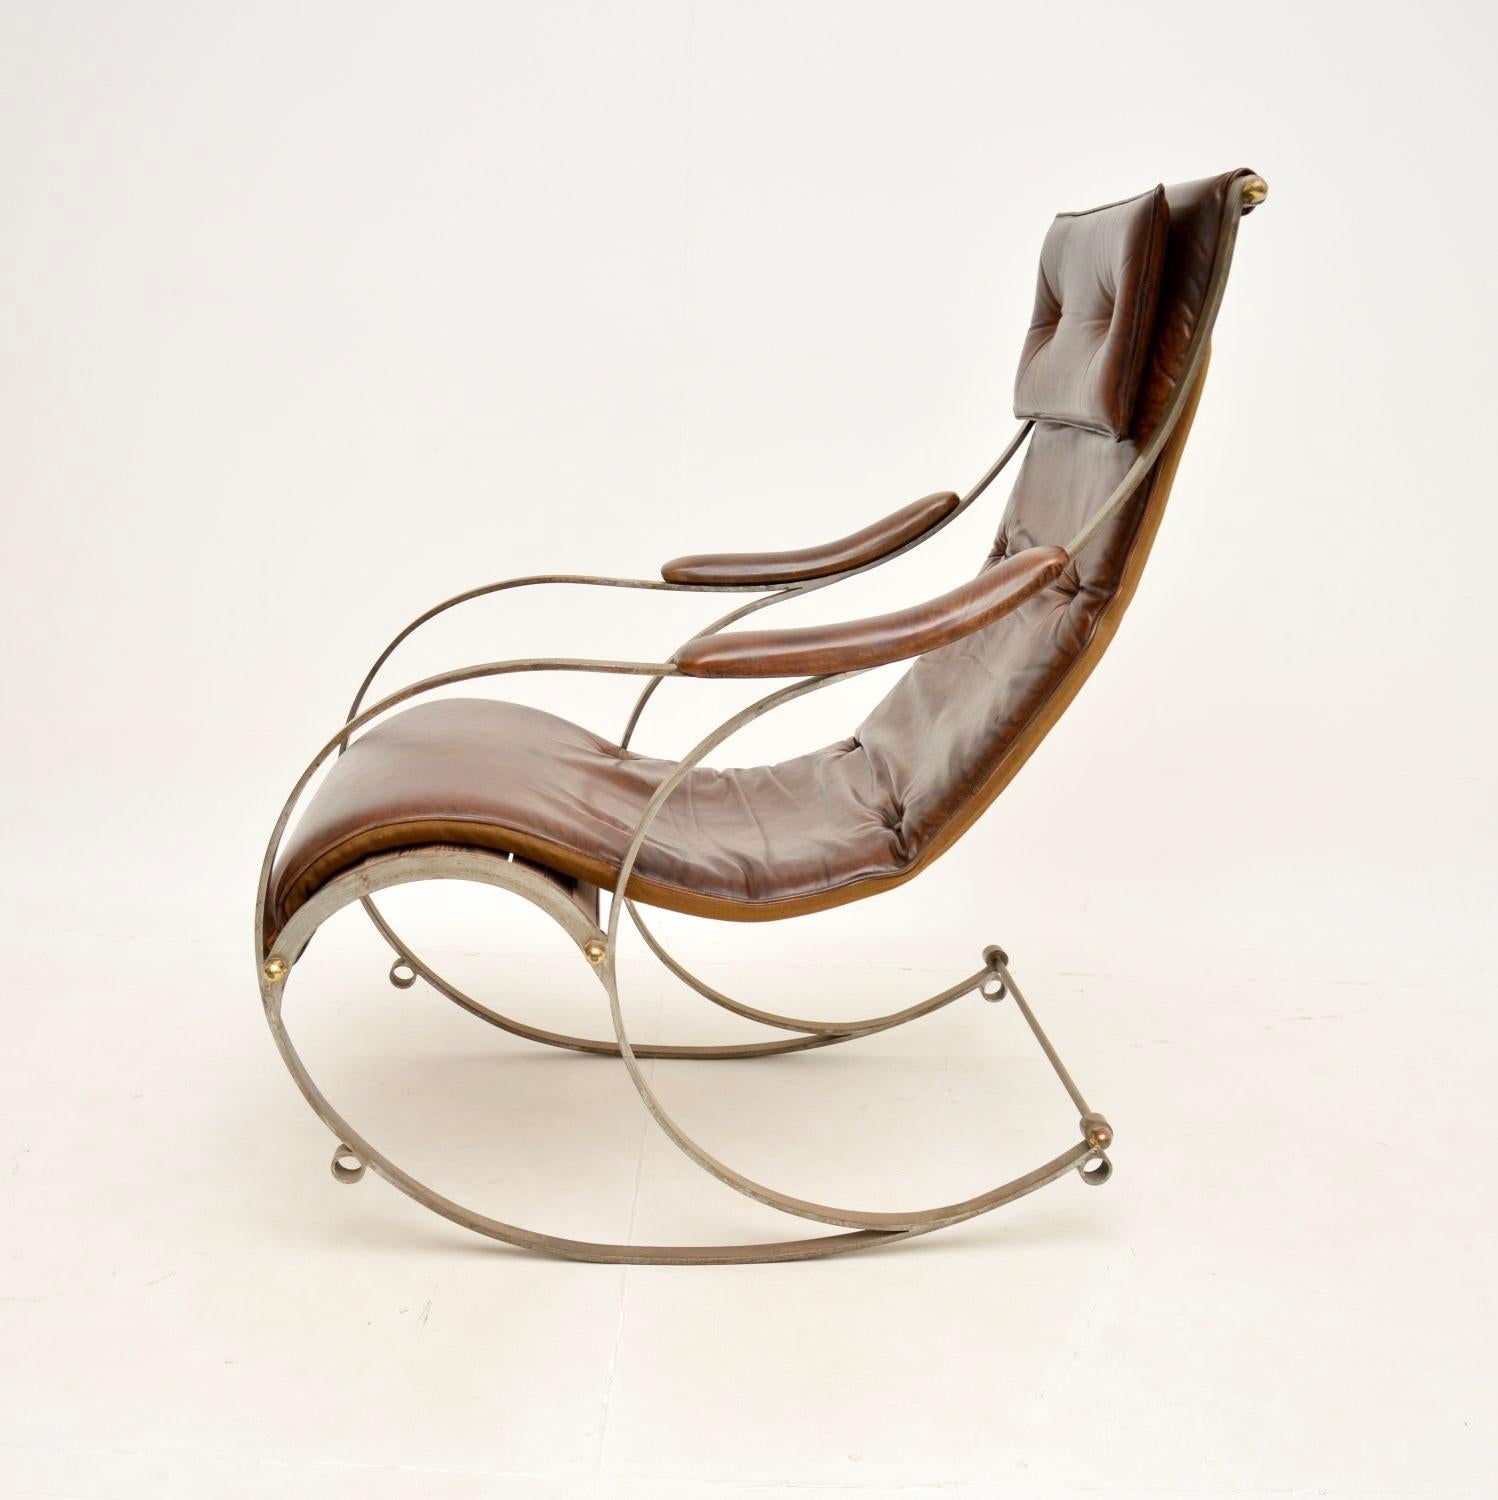 British Antique Victorian Steel and Leather Rocking Chair by Peter Cooper for R.W Winfie For Sale